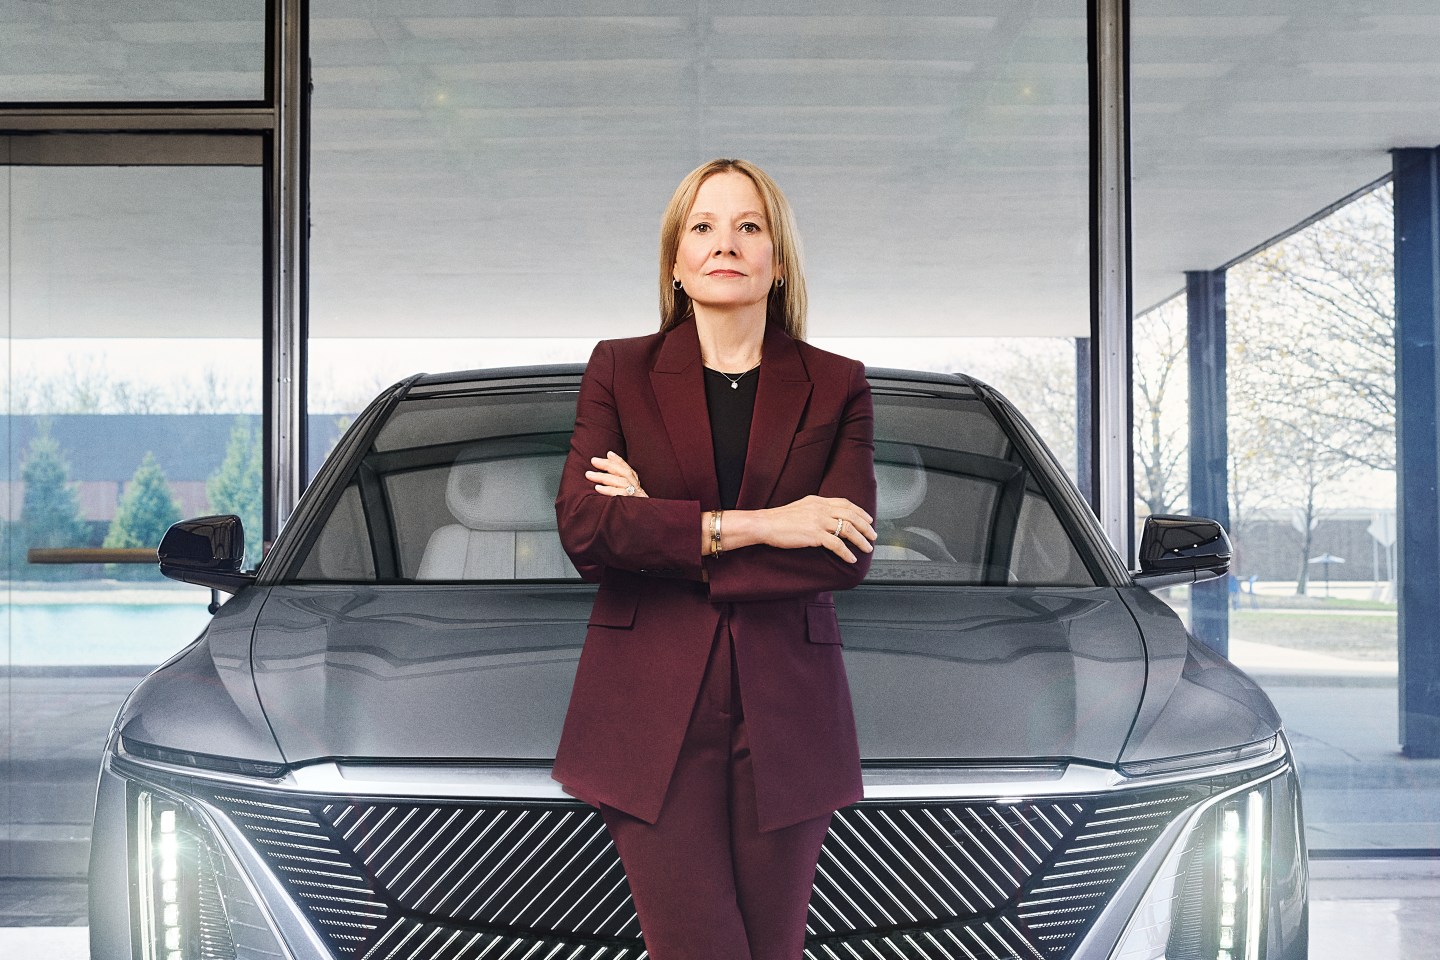 GM CEO Mary Barra photographed at GM&#8217;s Design Center with the Cadillac LYRIQ ev on May 4, 2022 in Detroit, Michigan.<br />
Spencer Lowell for Fortune